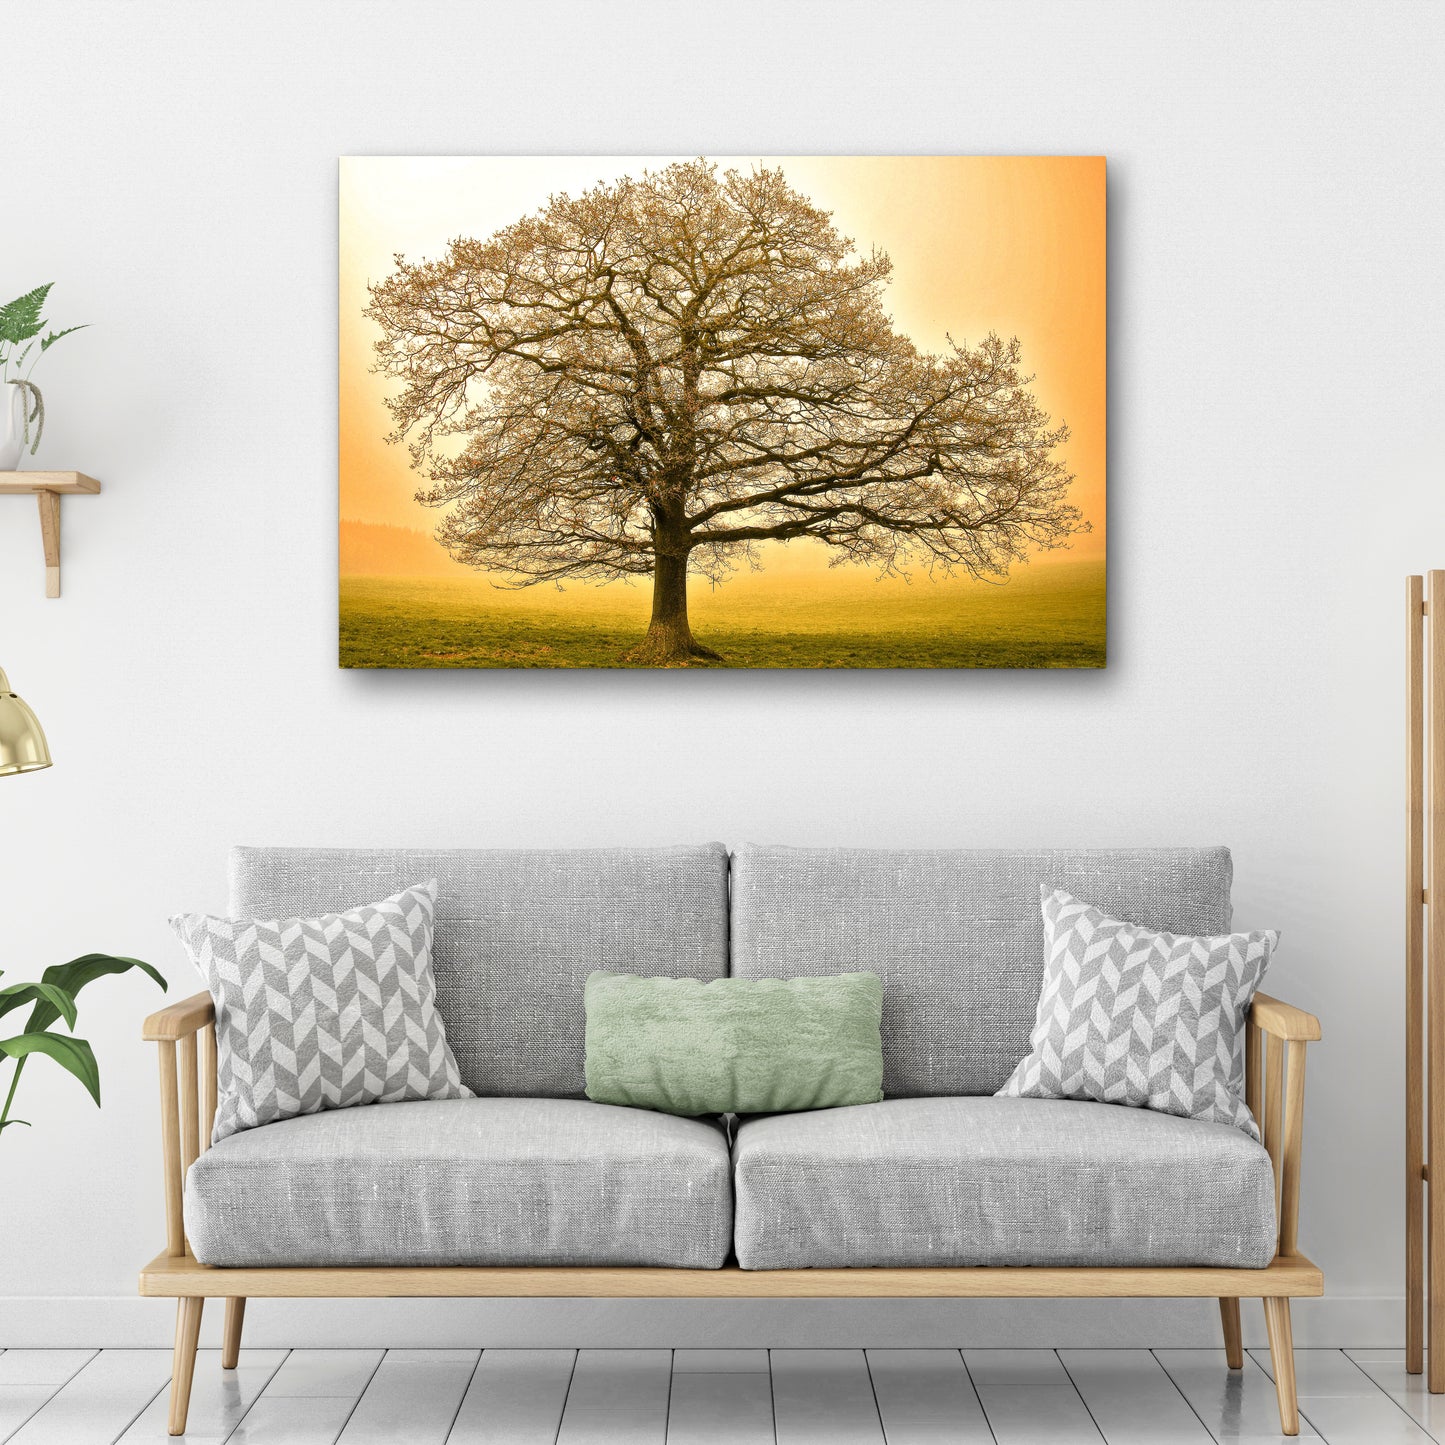 Golden Oak Tree Canvas Wall Art Style 2 - Image by Tailored Canvases